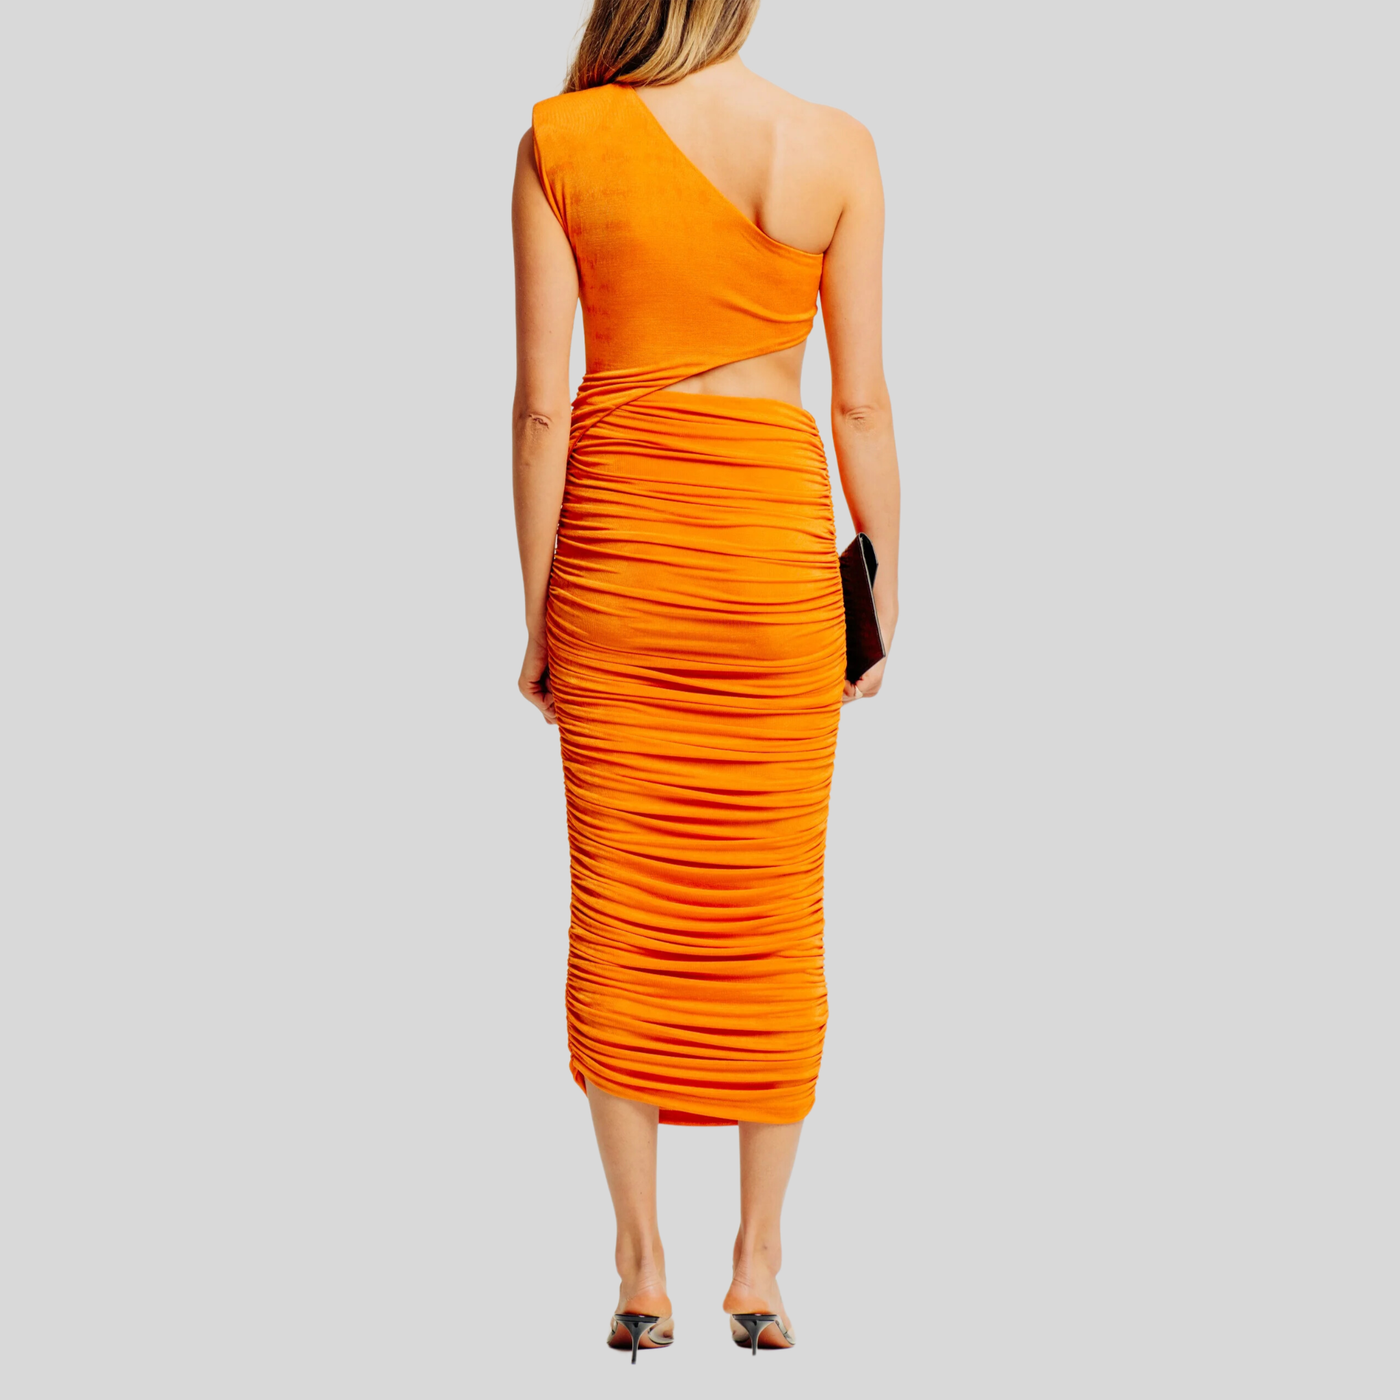 Gotstyle Fashion - Ronny Kobo Dresses Ruched One-Shoulder Side Cutout Form-Fit Dress - Tangerine